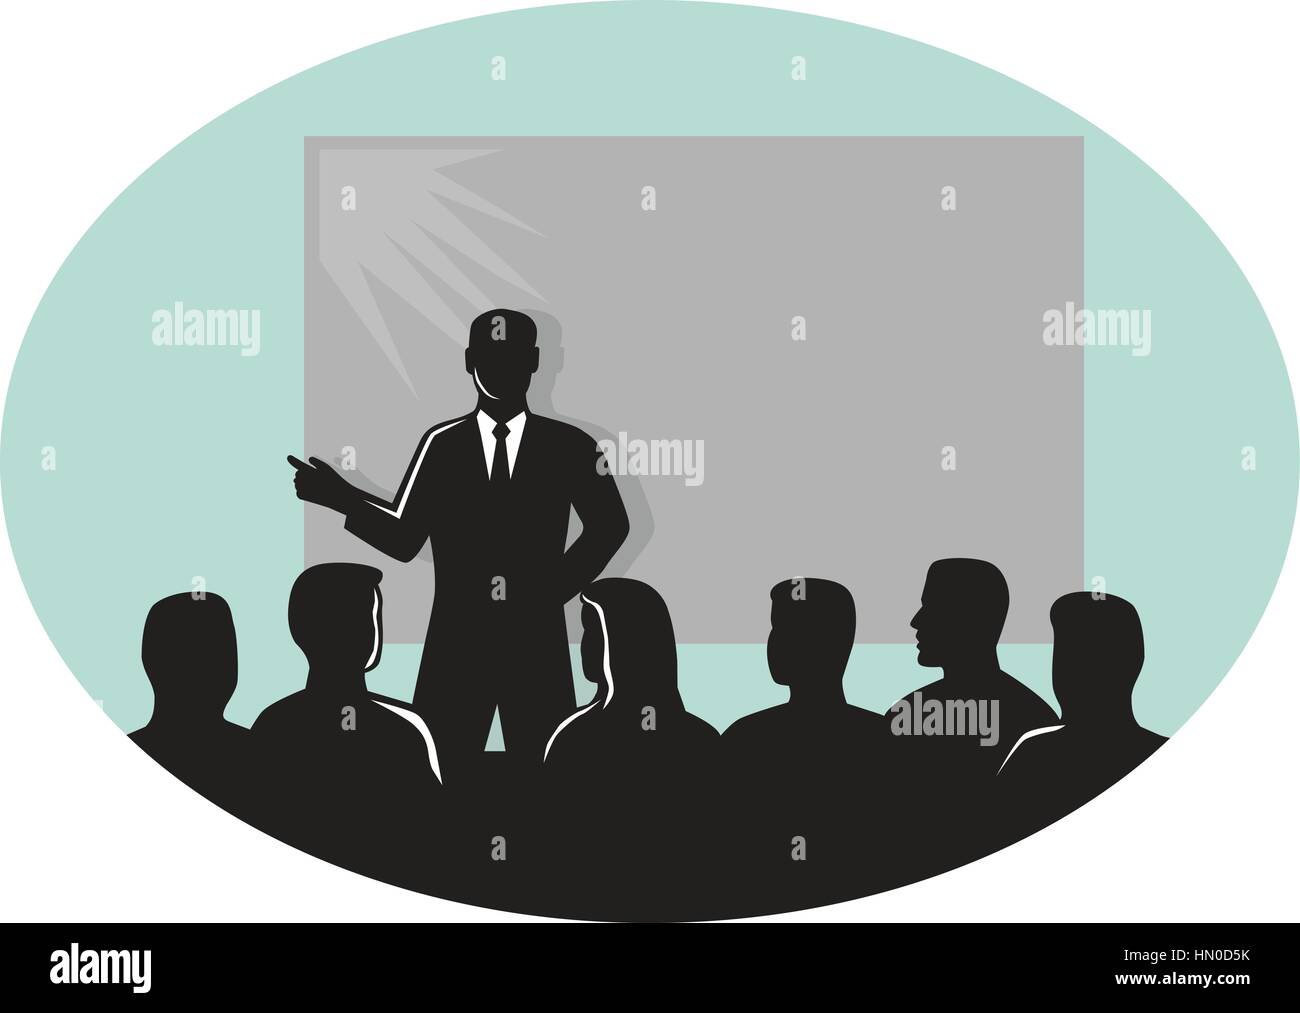 Illustration of a speaker talking in front of audience with a projector screen at the back set inside oval shape done in retro woodcut style . Stock Vector